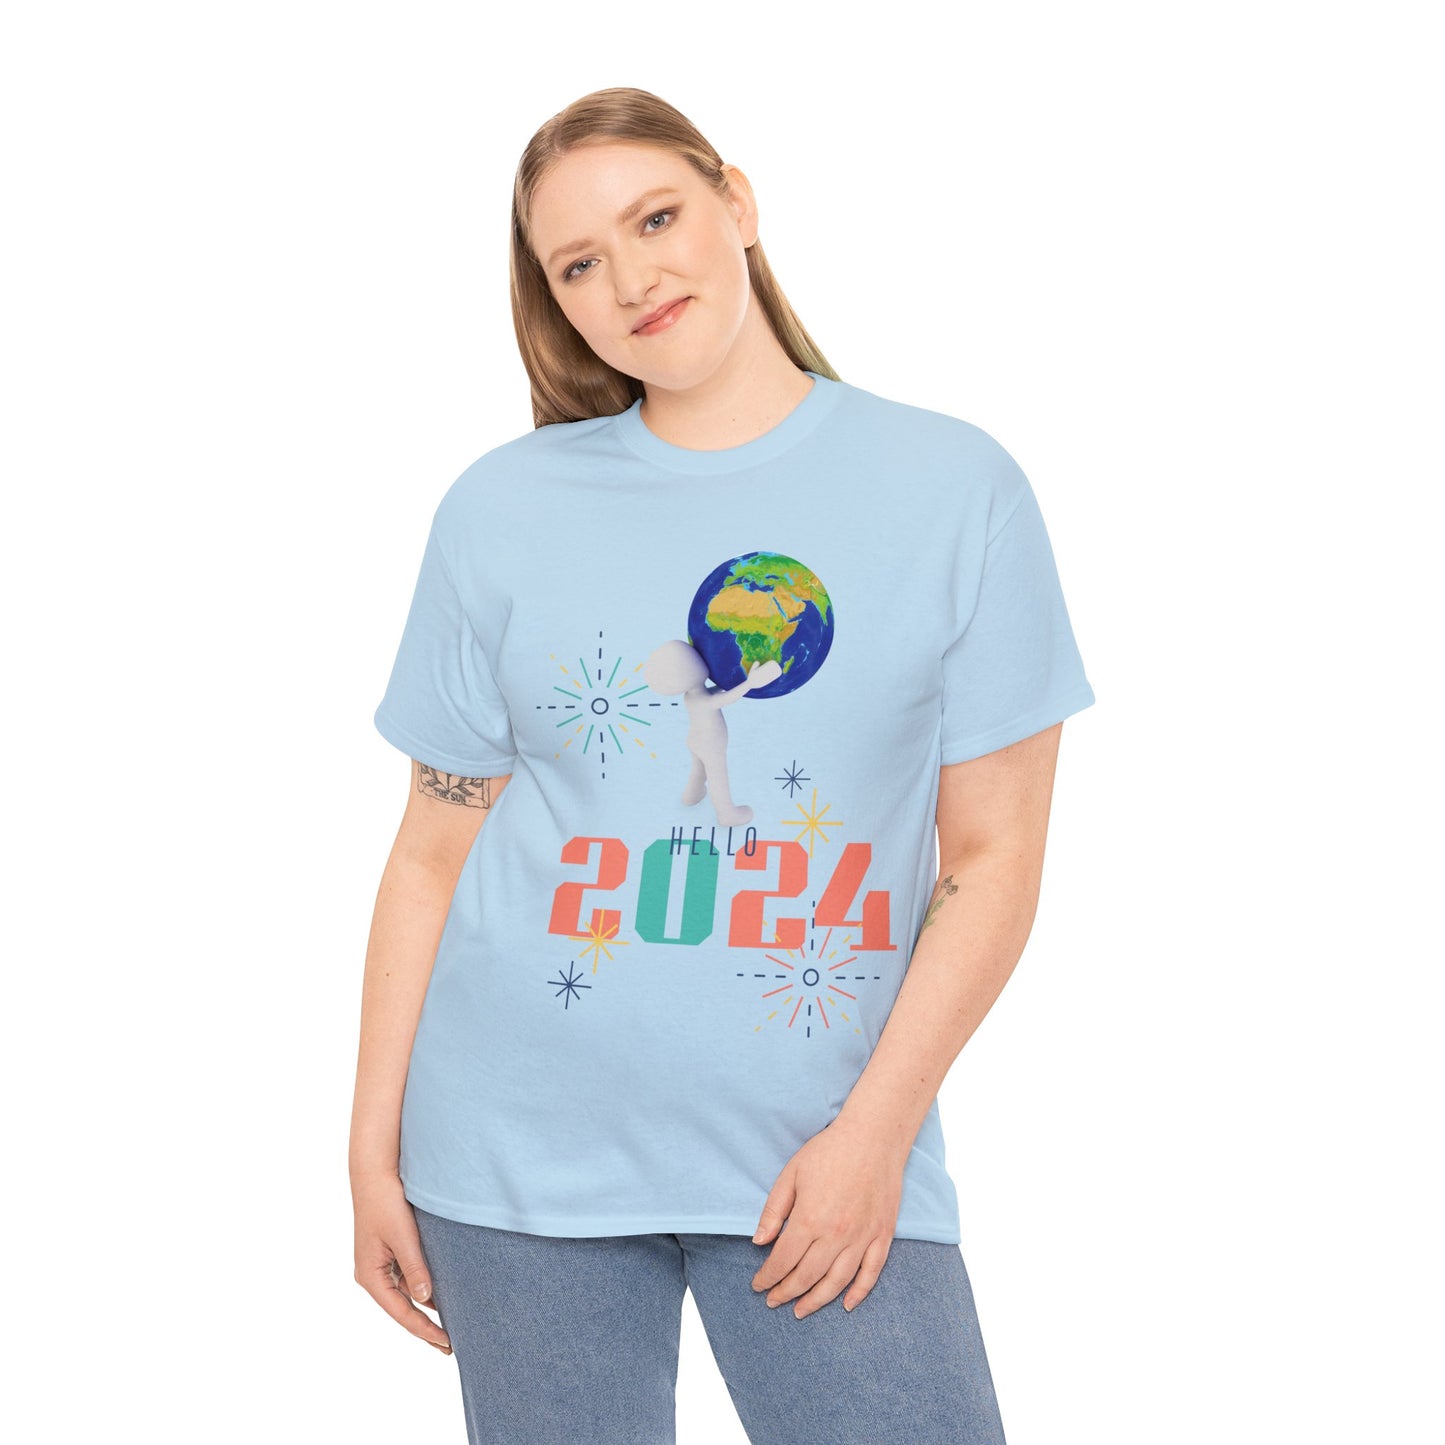 2024 Man Carrying the World" Unisex Heavy Cotton Tee - Wear the Future on Your Sleeve